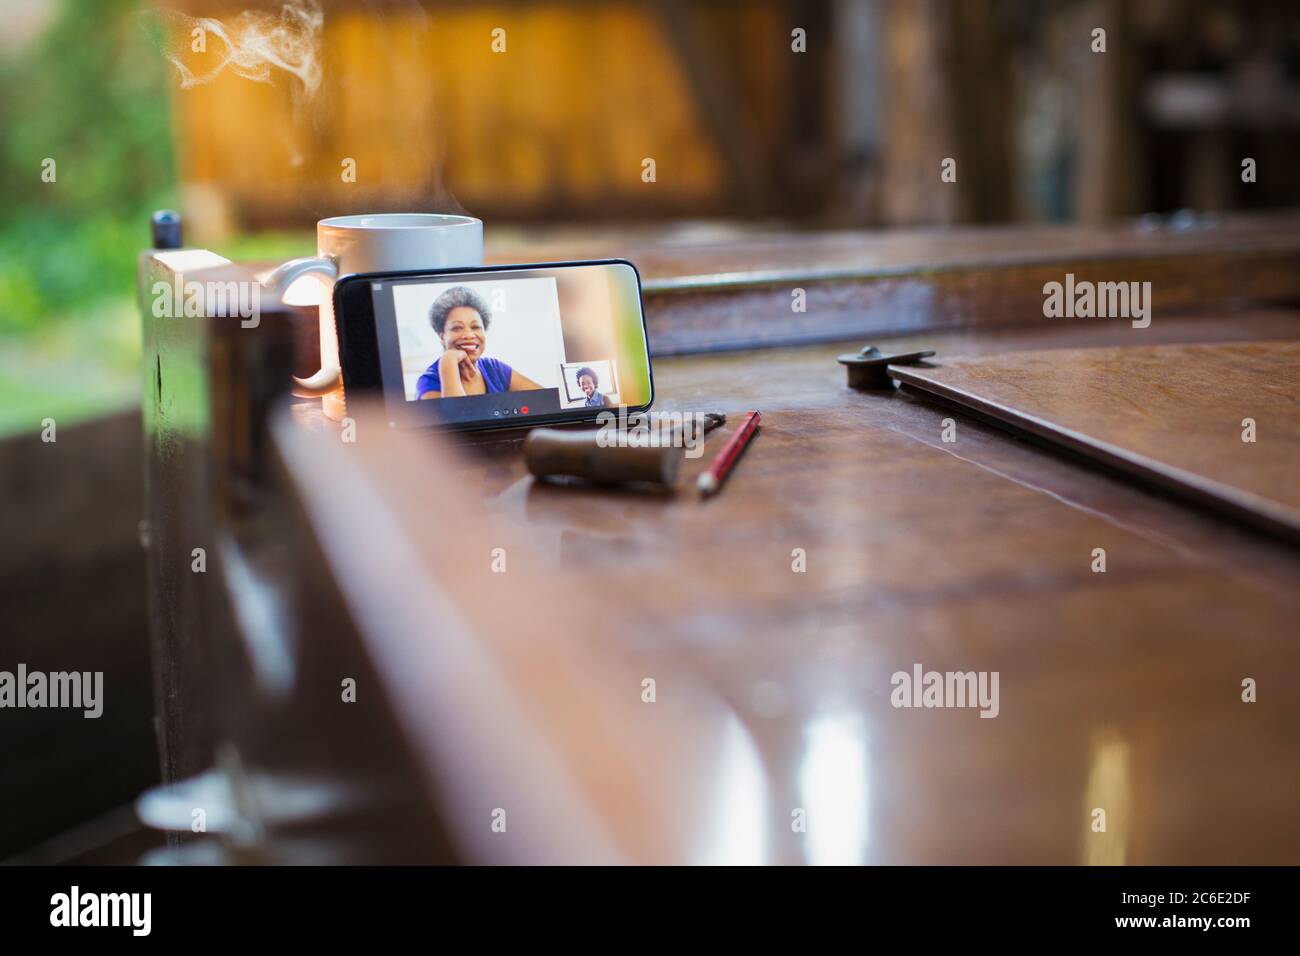 Colleagues video chatting on smart phone screen Stock Photo